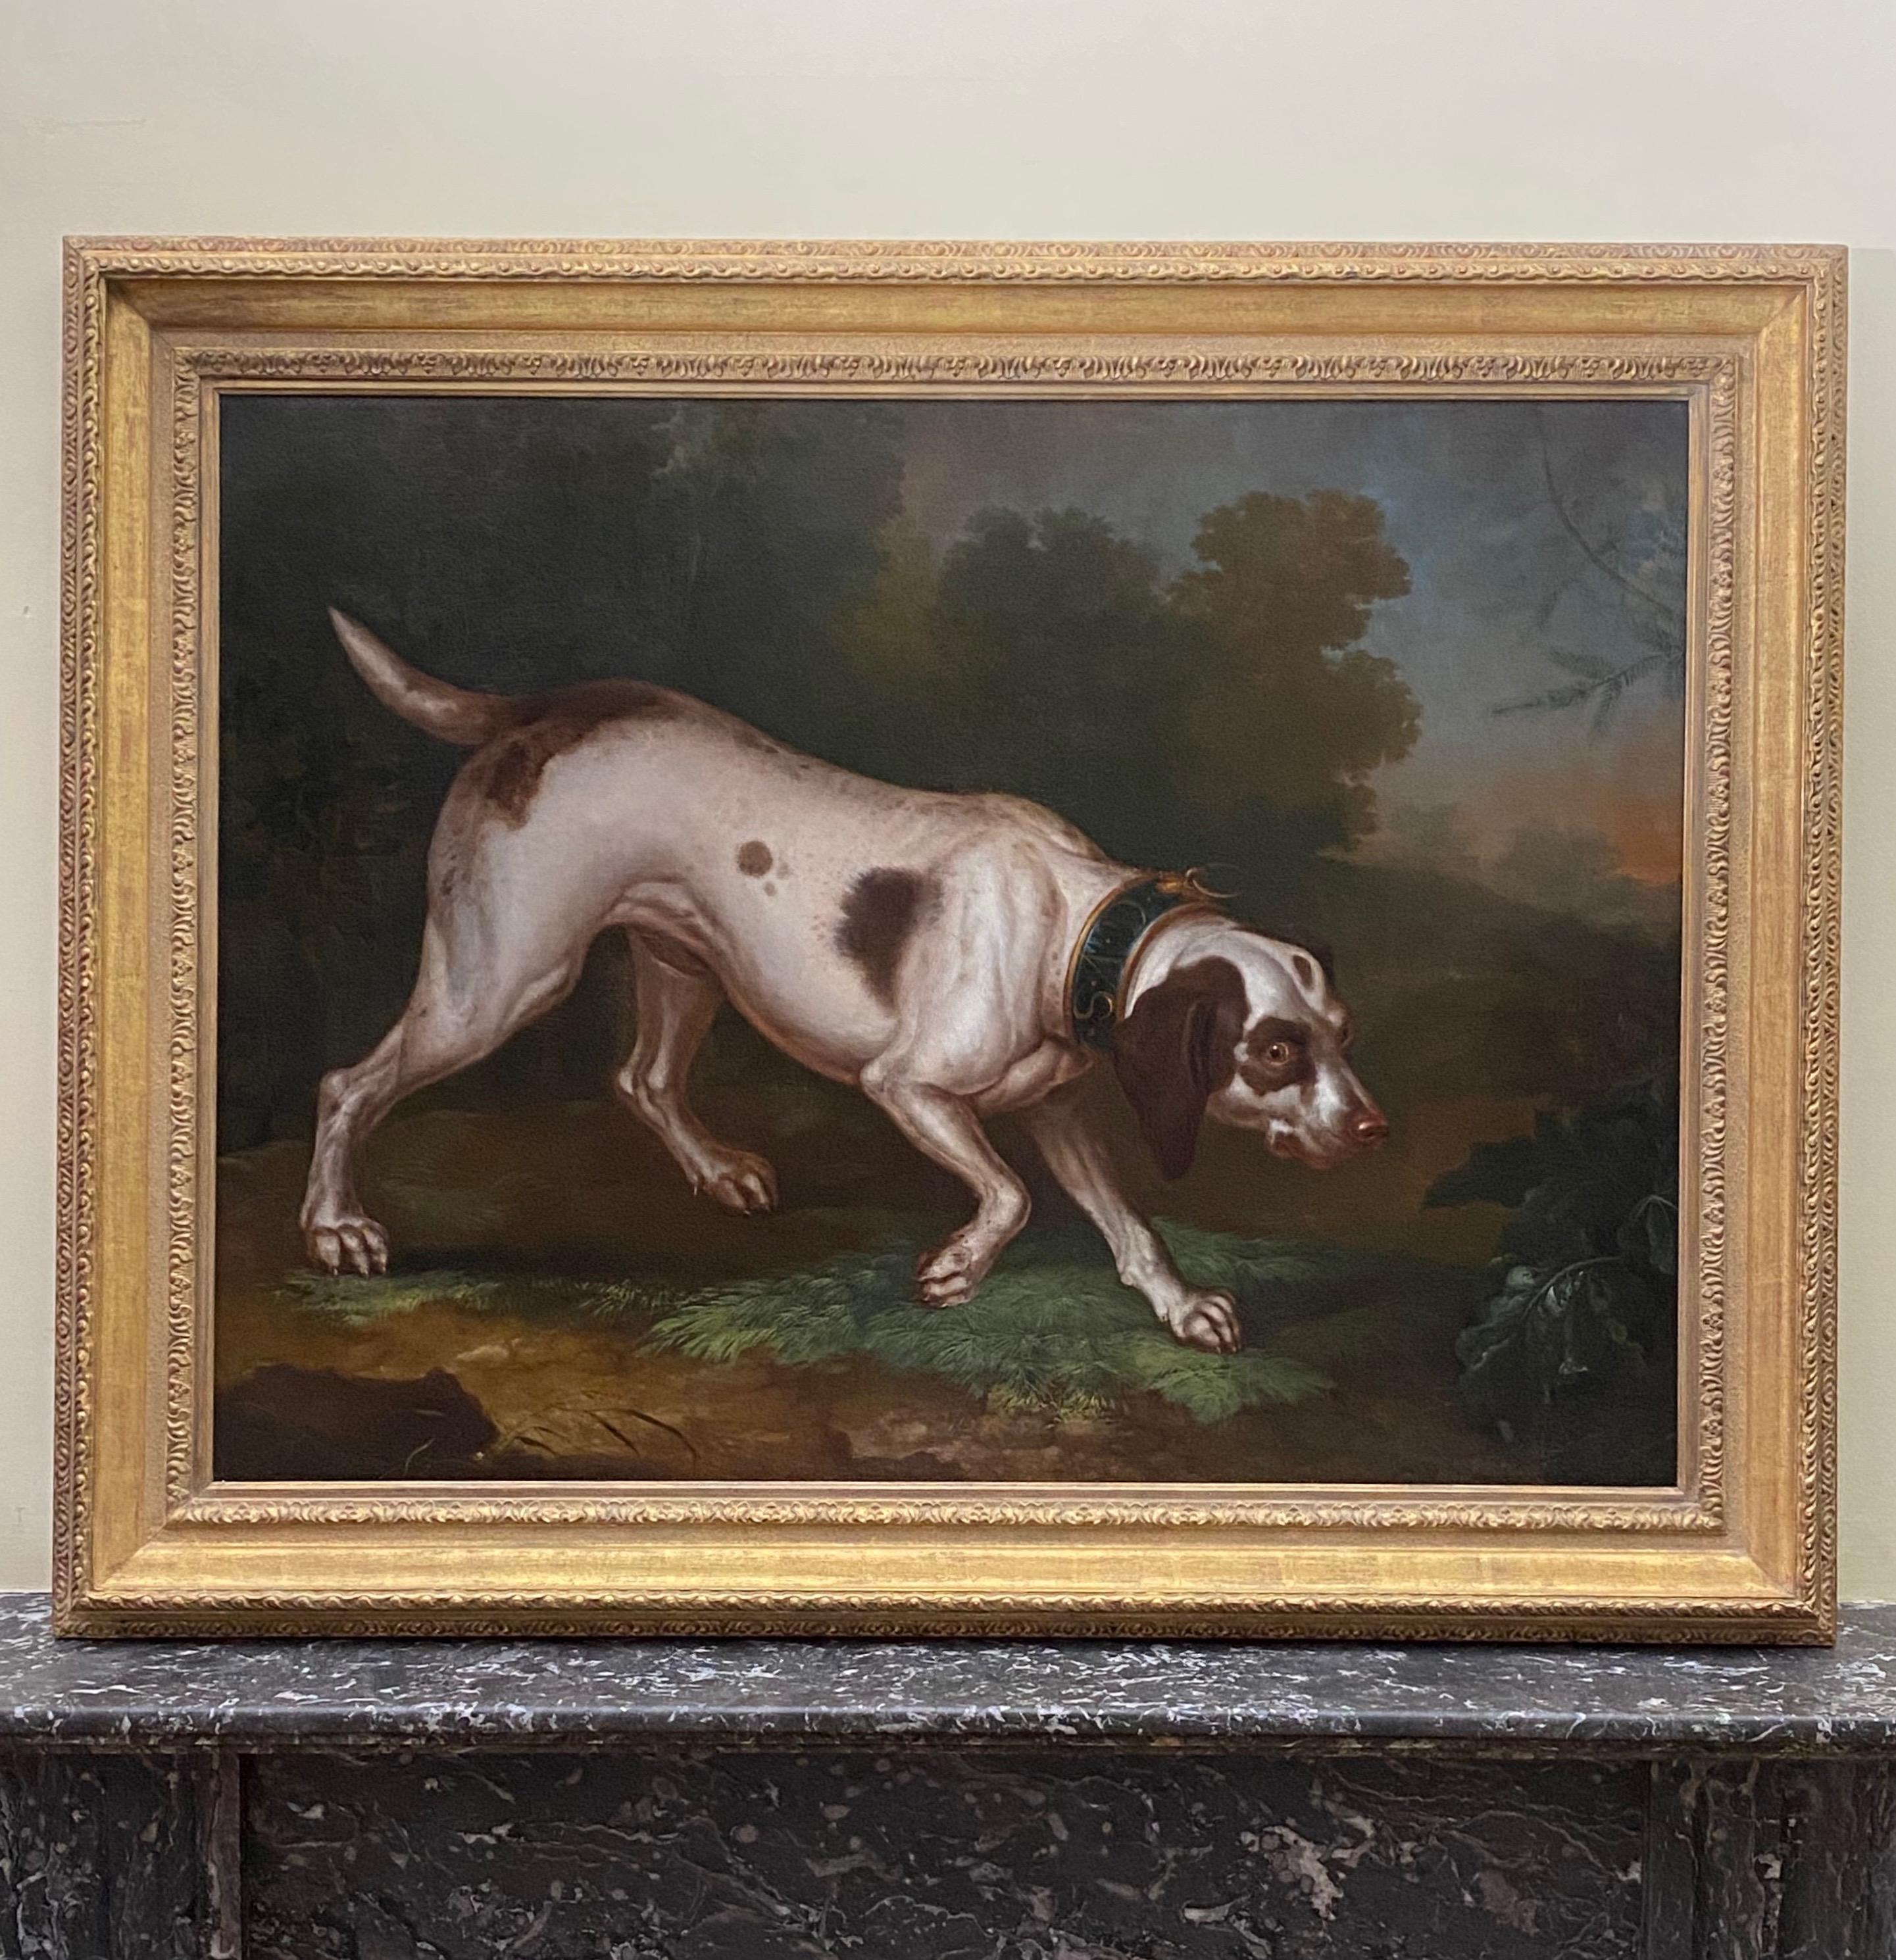 EARLY 18TH CENTURY SPORTING OIL - A POINTER DOG HUNTING IN A LANDSCAPE.

A fine, monumental and highly decorative early eighteenth century sporting oil on canvas of a pointer in a landscape wearing a wide collar initialled G V S by Philipp Ferdinand